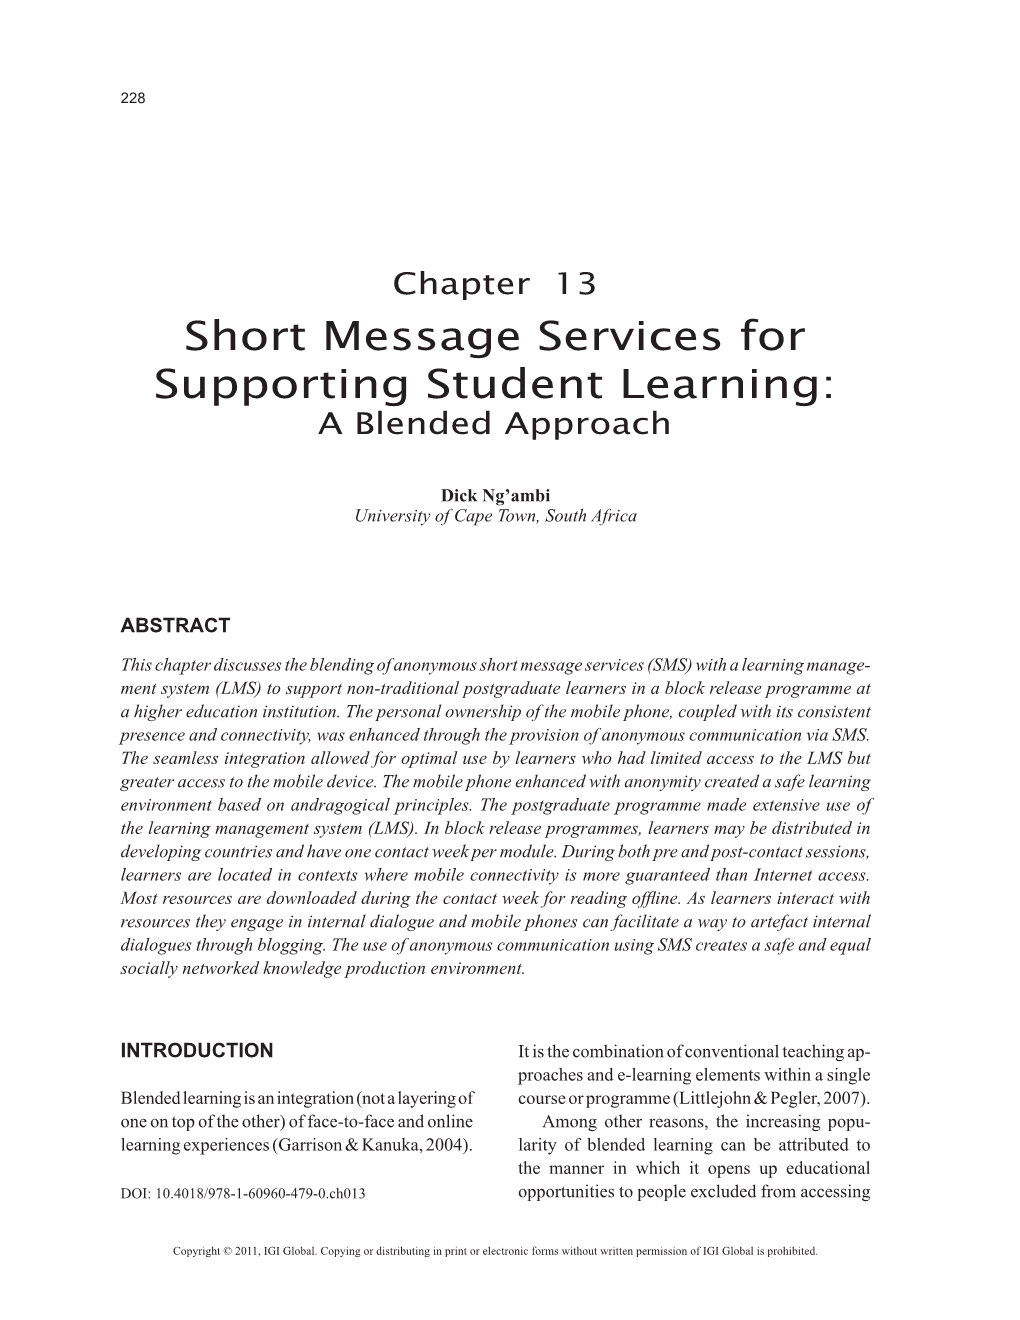 Short Message Services for Supporting Student Learning: a Blended Approach